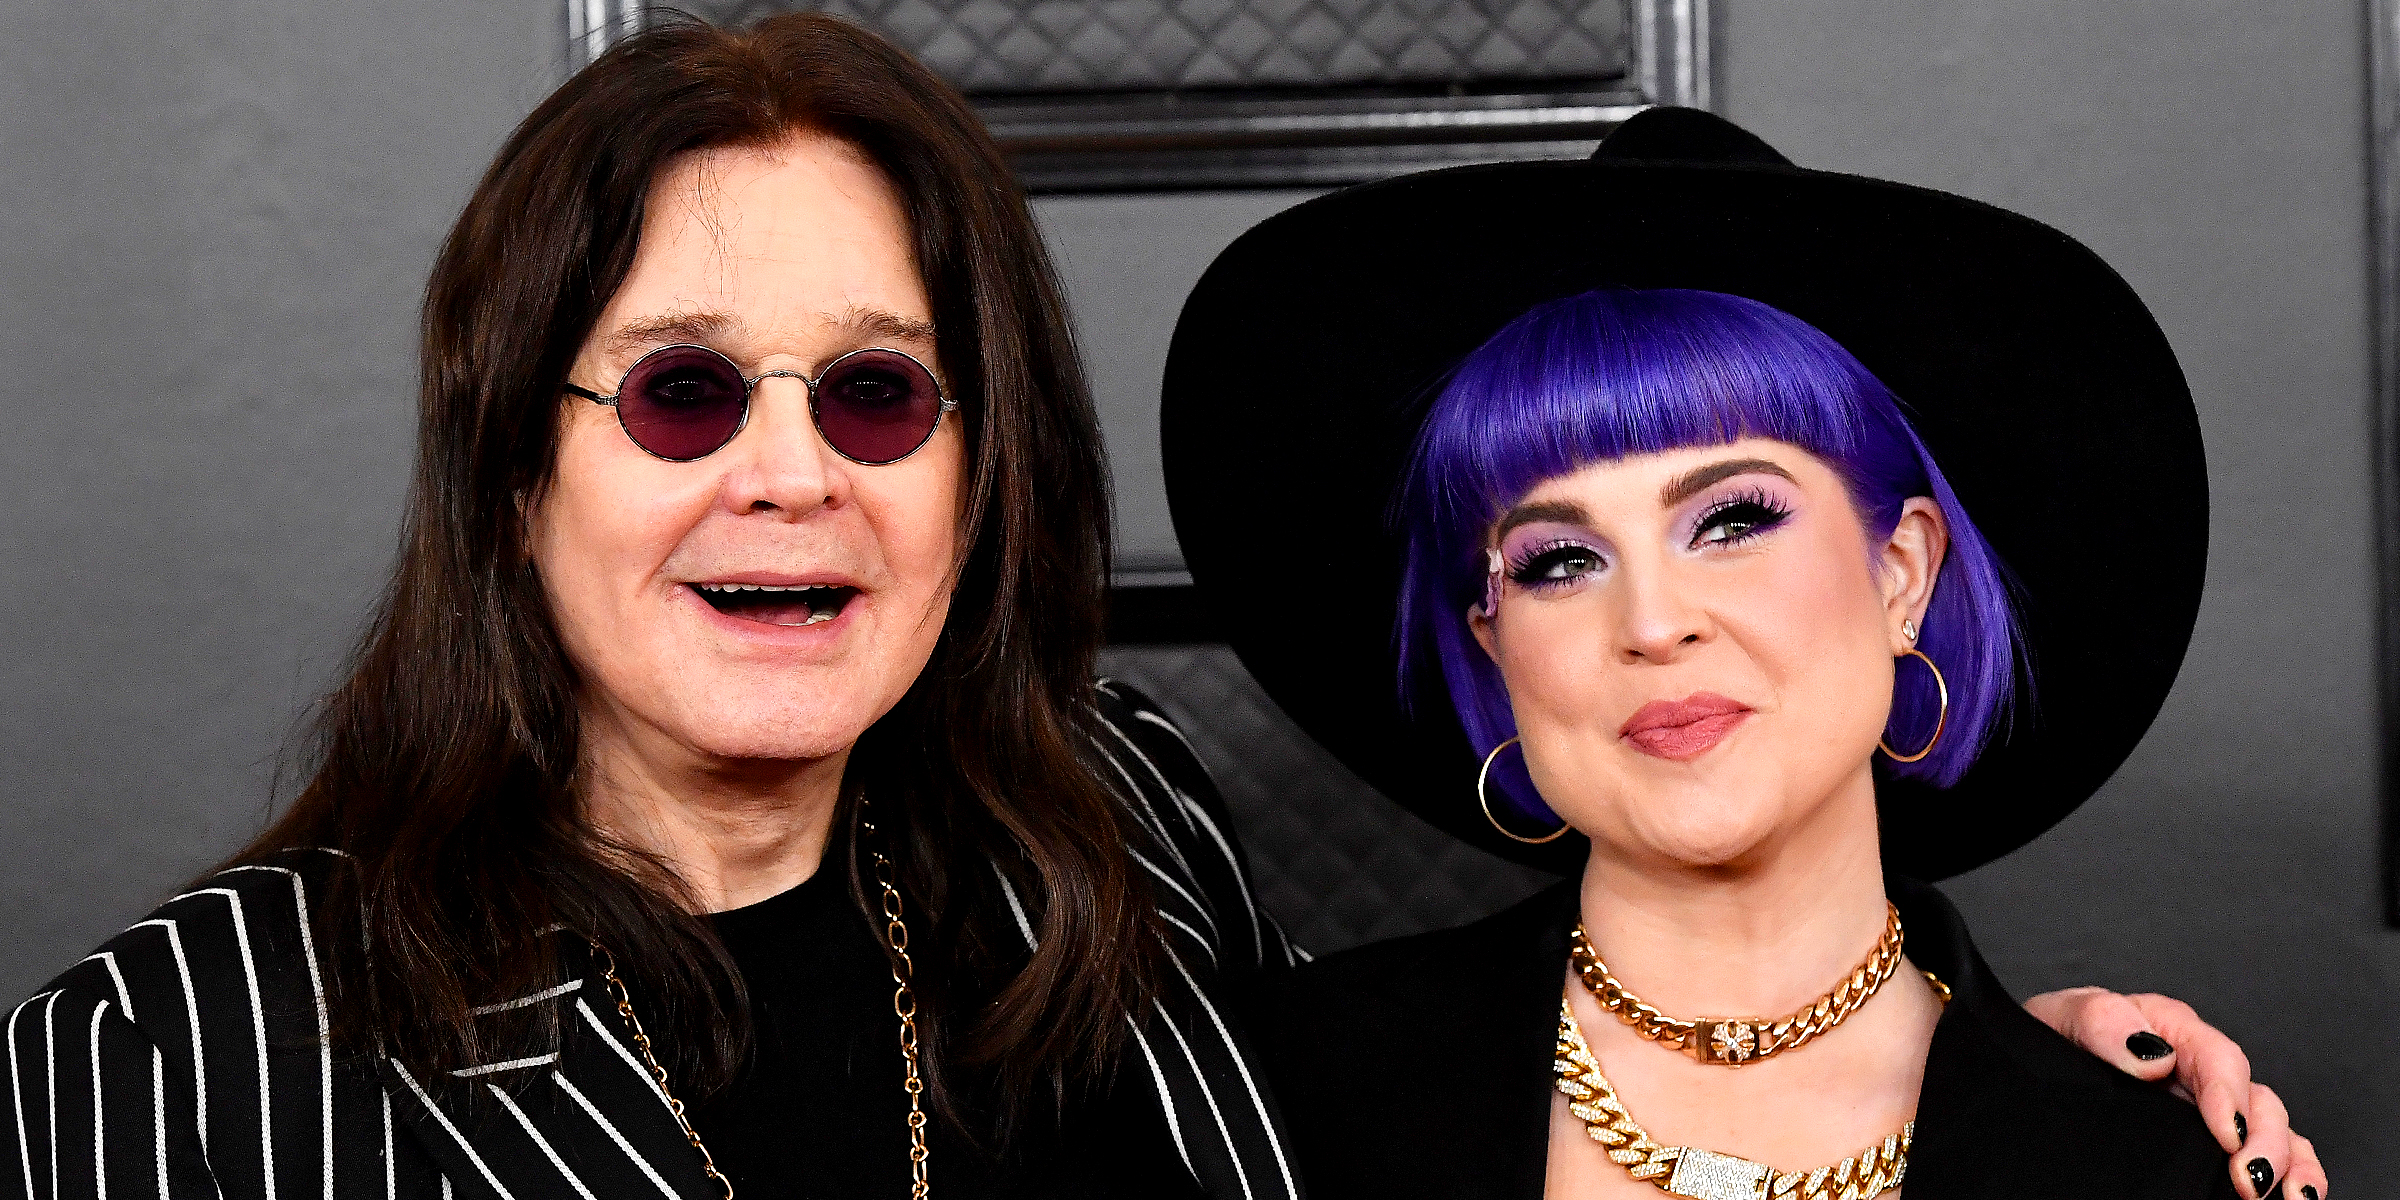 Ozzy Osbourne and his daughter Kelly | Source: Getty Images